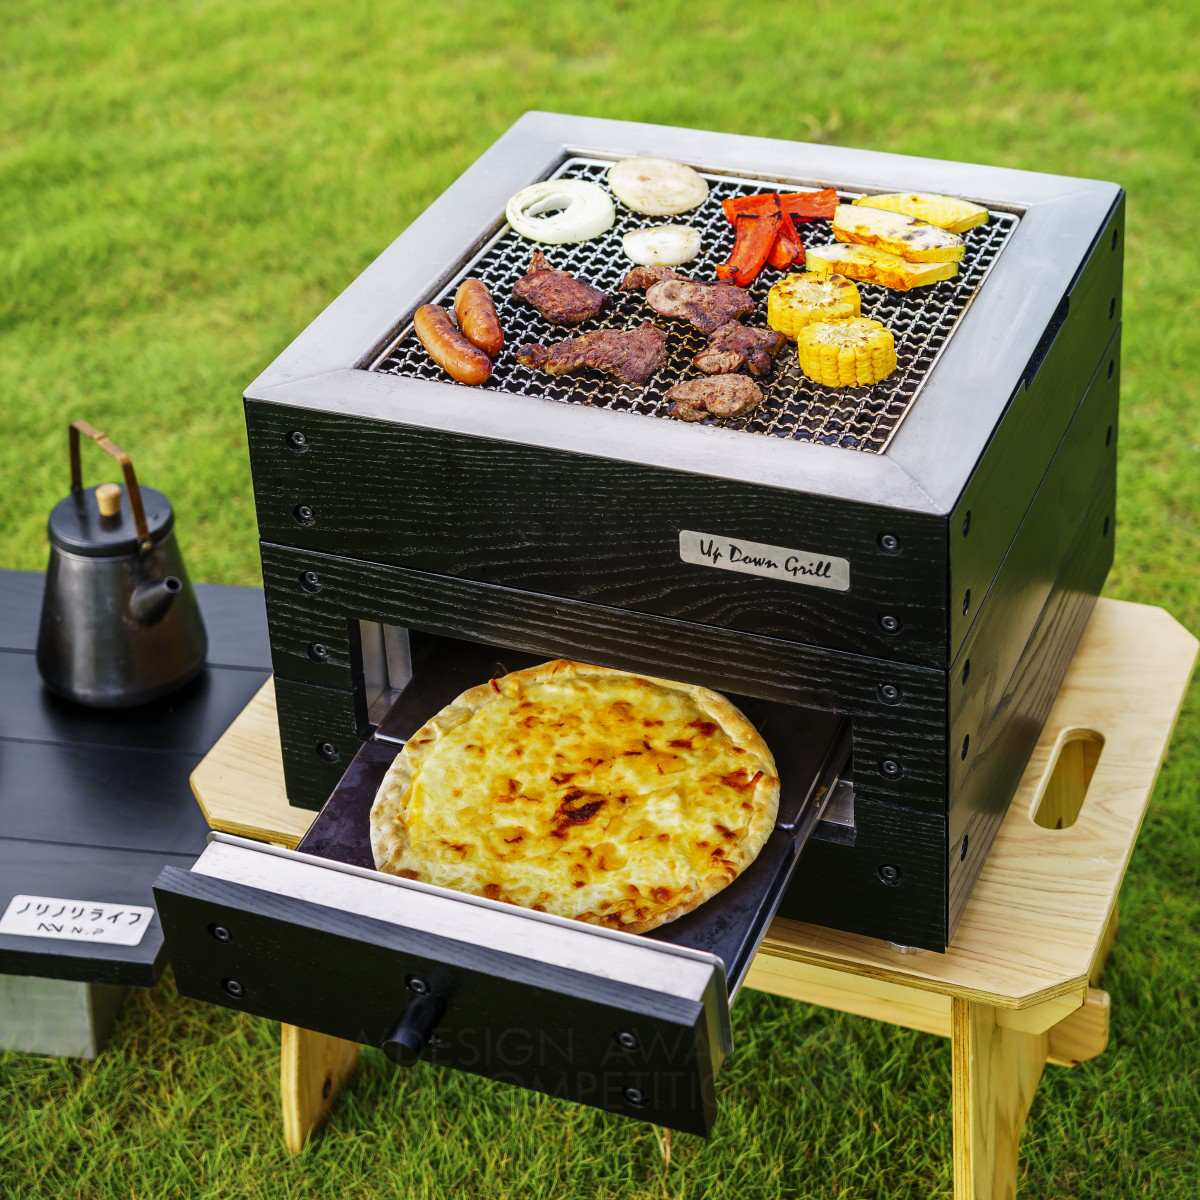 Kenzo Noridomi wins Bronze at the prestigious A' Camping Gear and Outdoor Equipment Design Award with Up Down Grill Portable Oven.